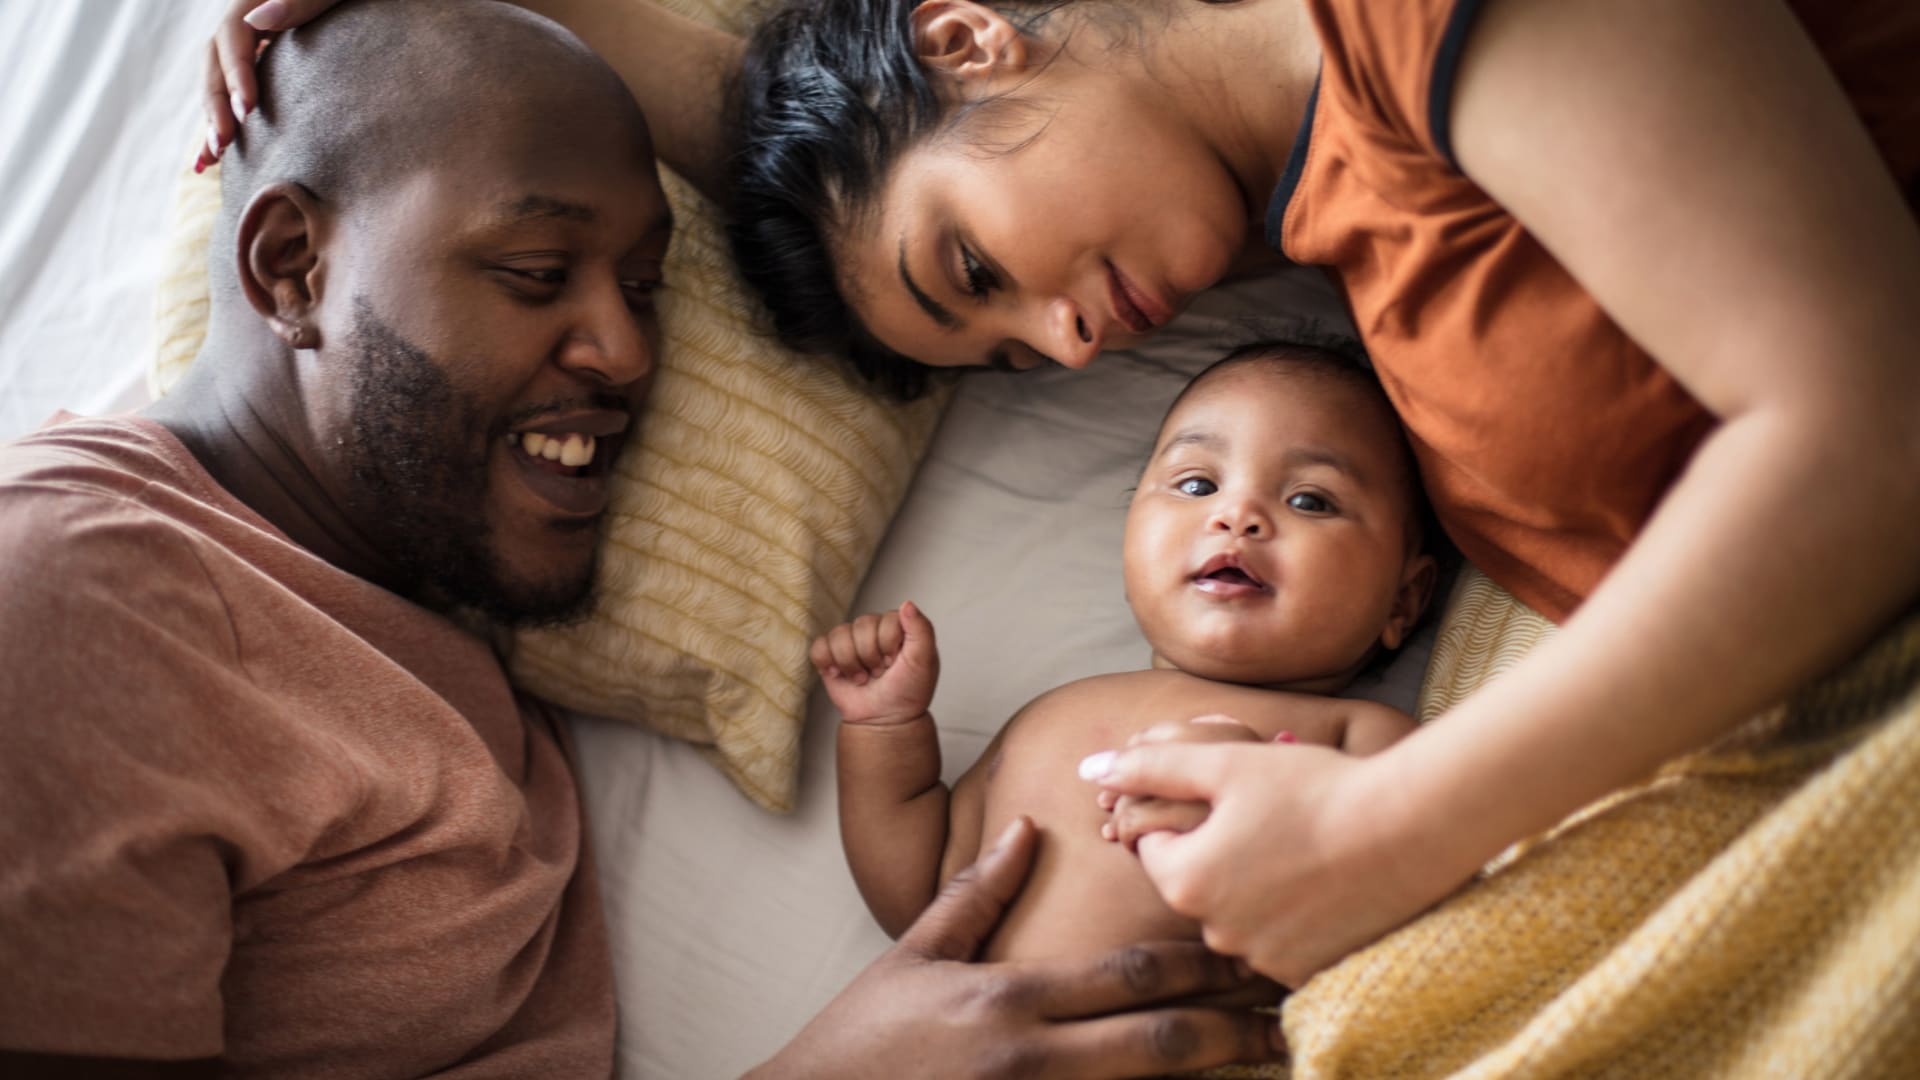 New Study: Small Business Owners Like Paid Family Leave Even More Once They've Tried It